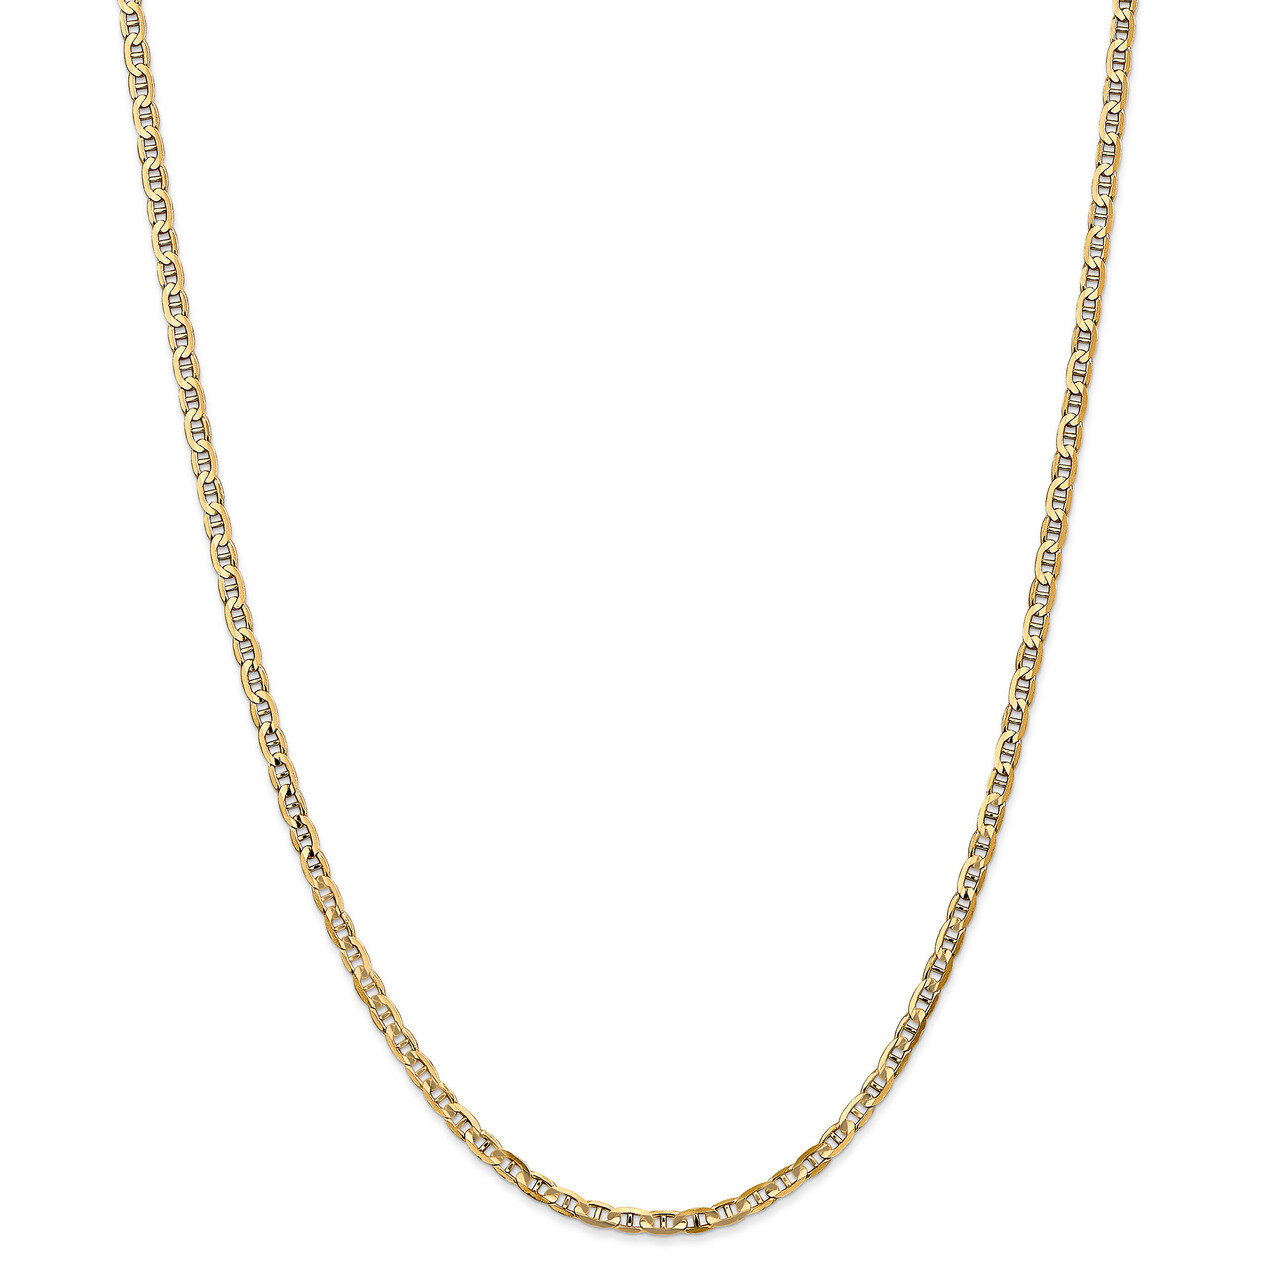 3mm Concave Anchor Chain 16 Inch 14k Gold HB-1314-16